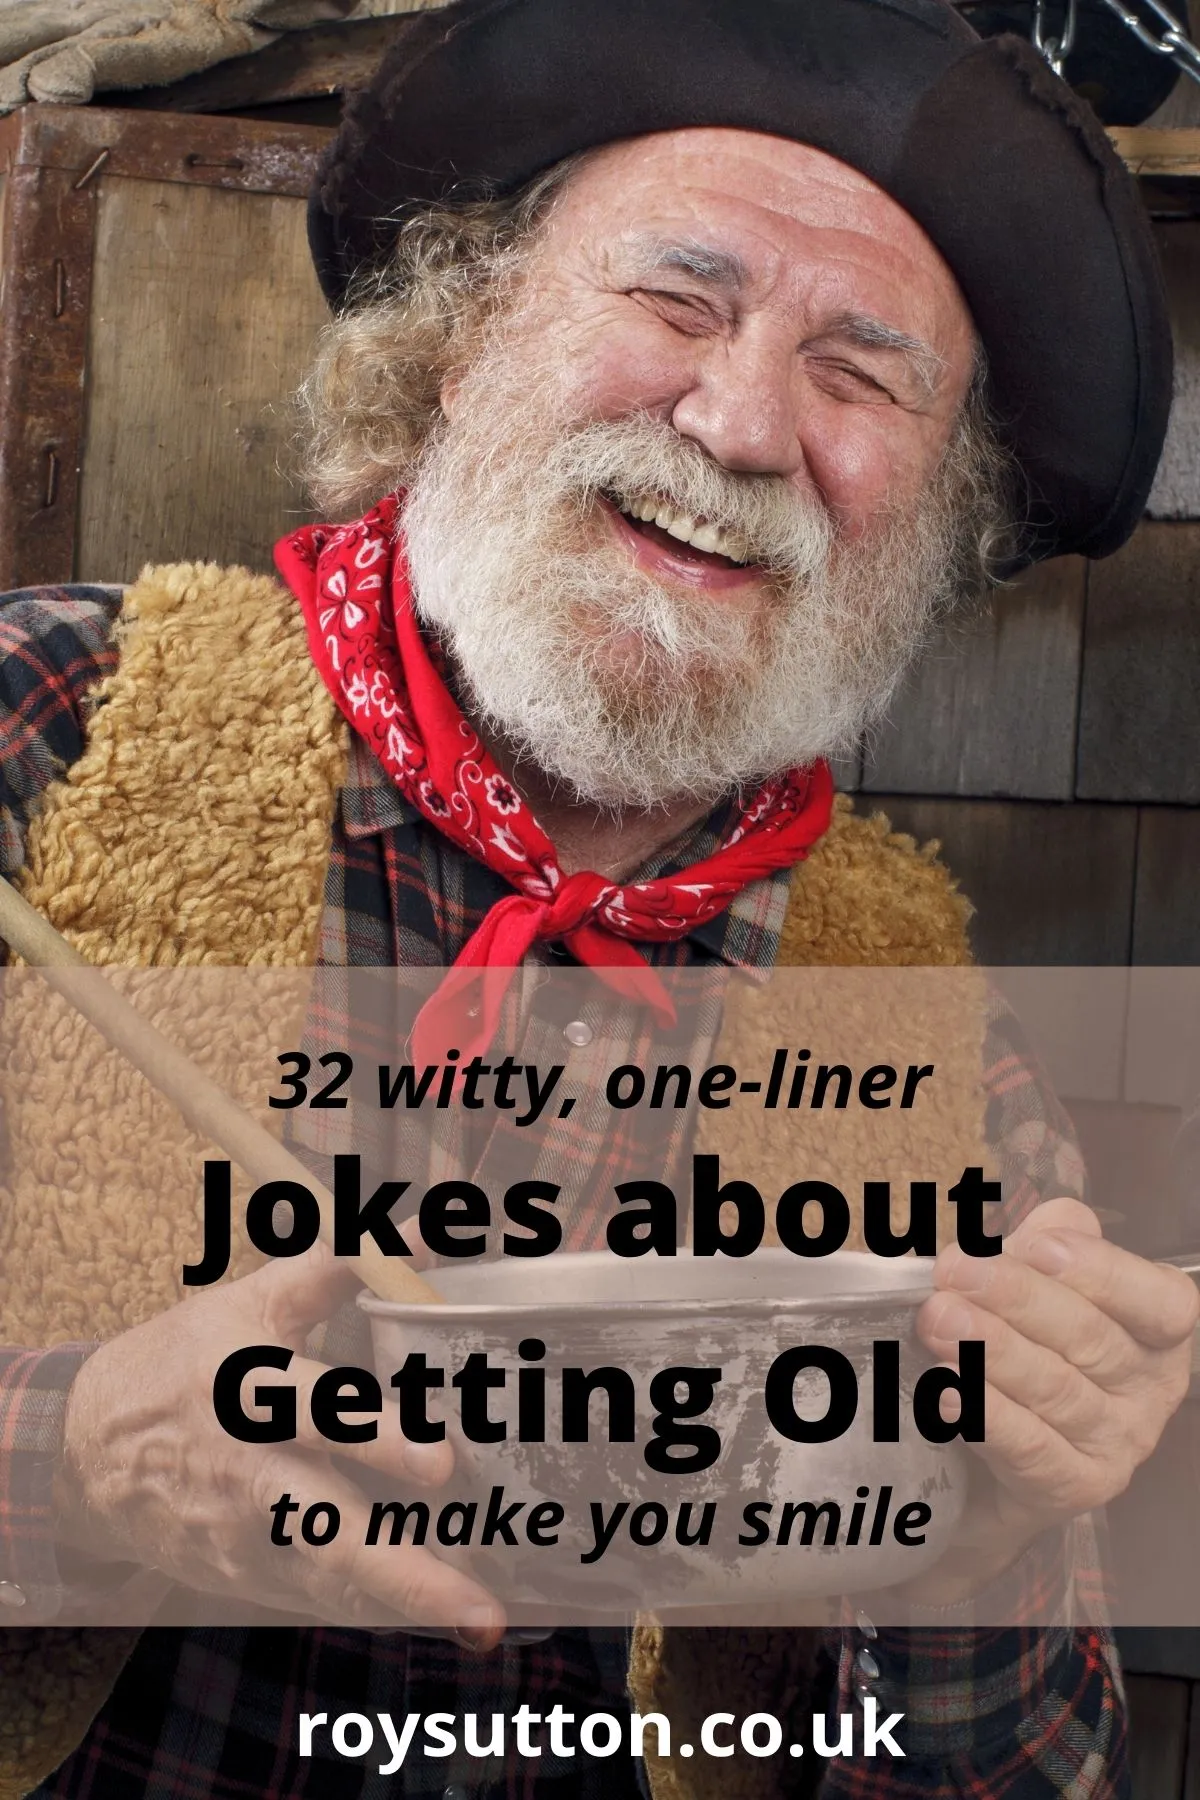 32 witty, one-liner jokes about getting old to make you smile - Roy Sutton